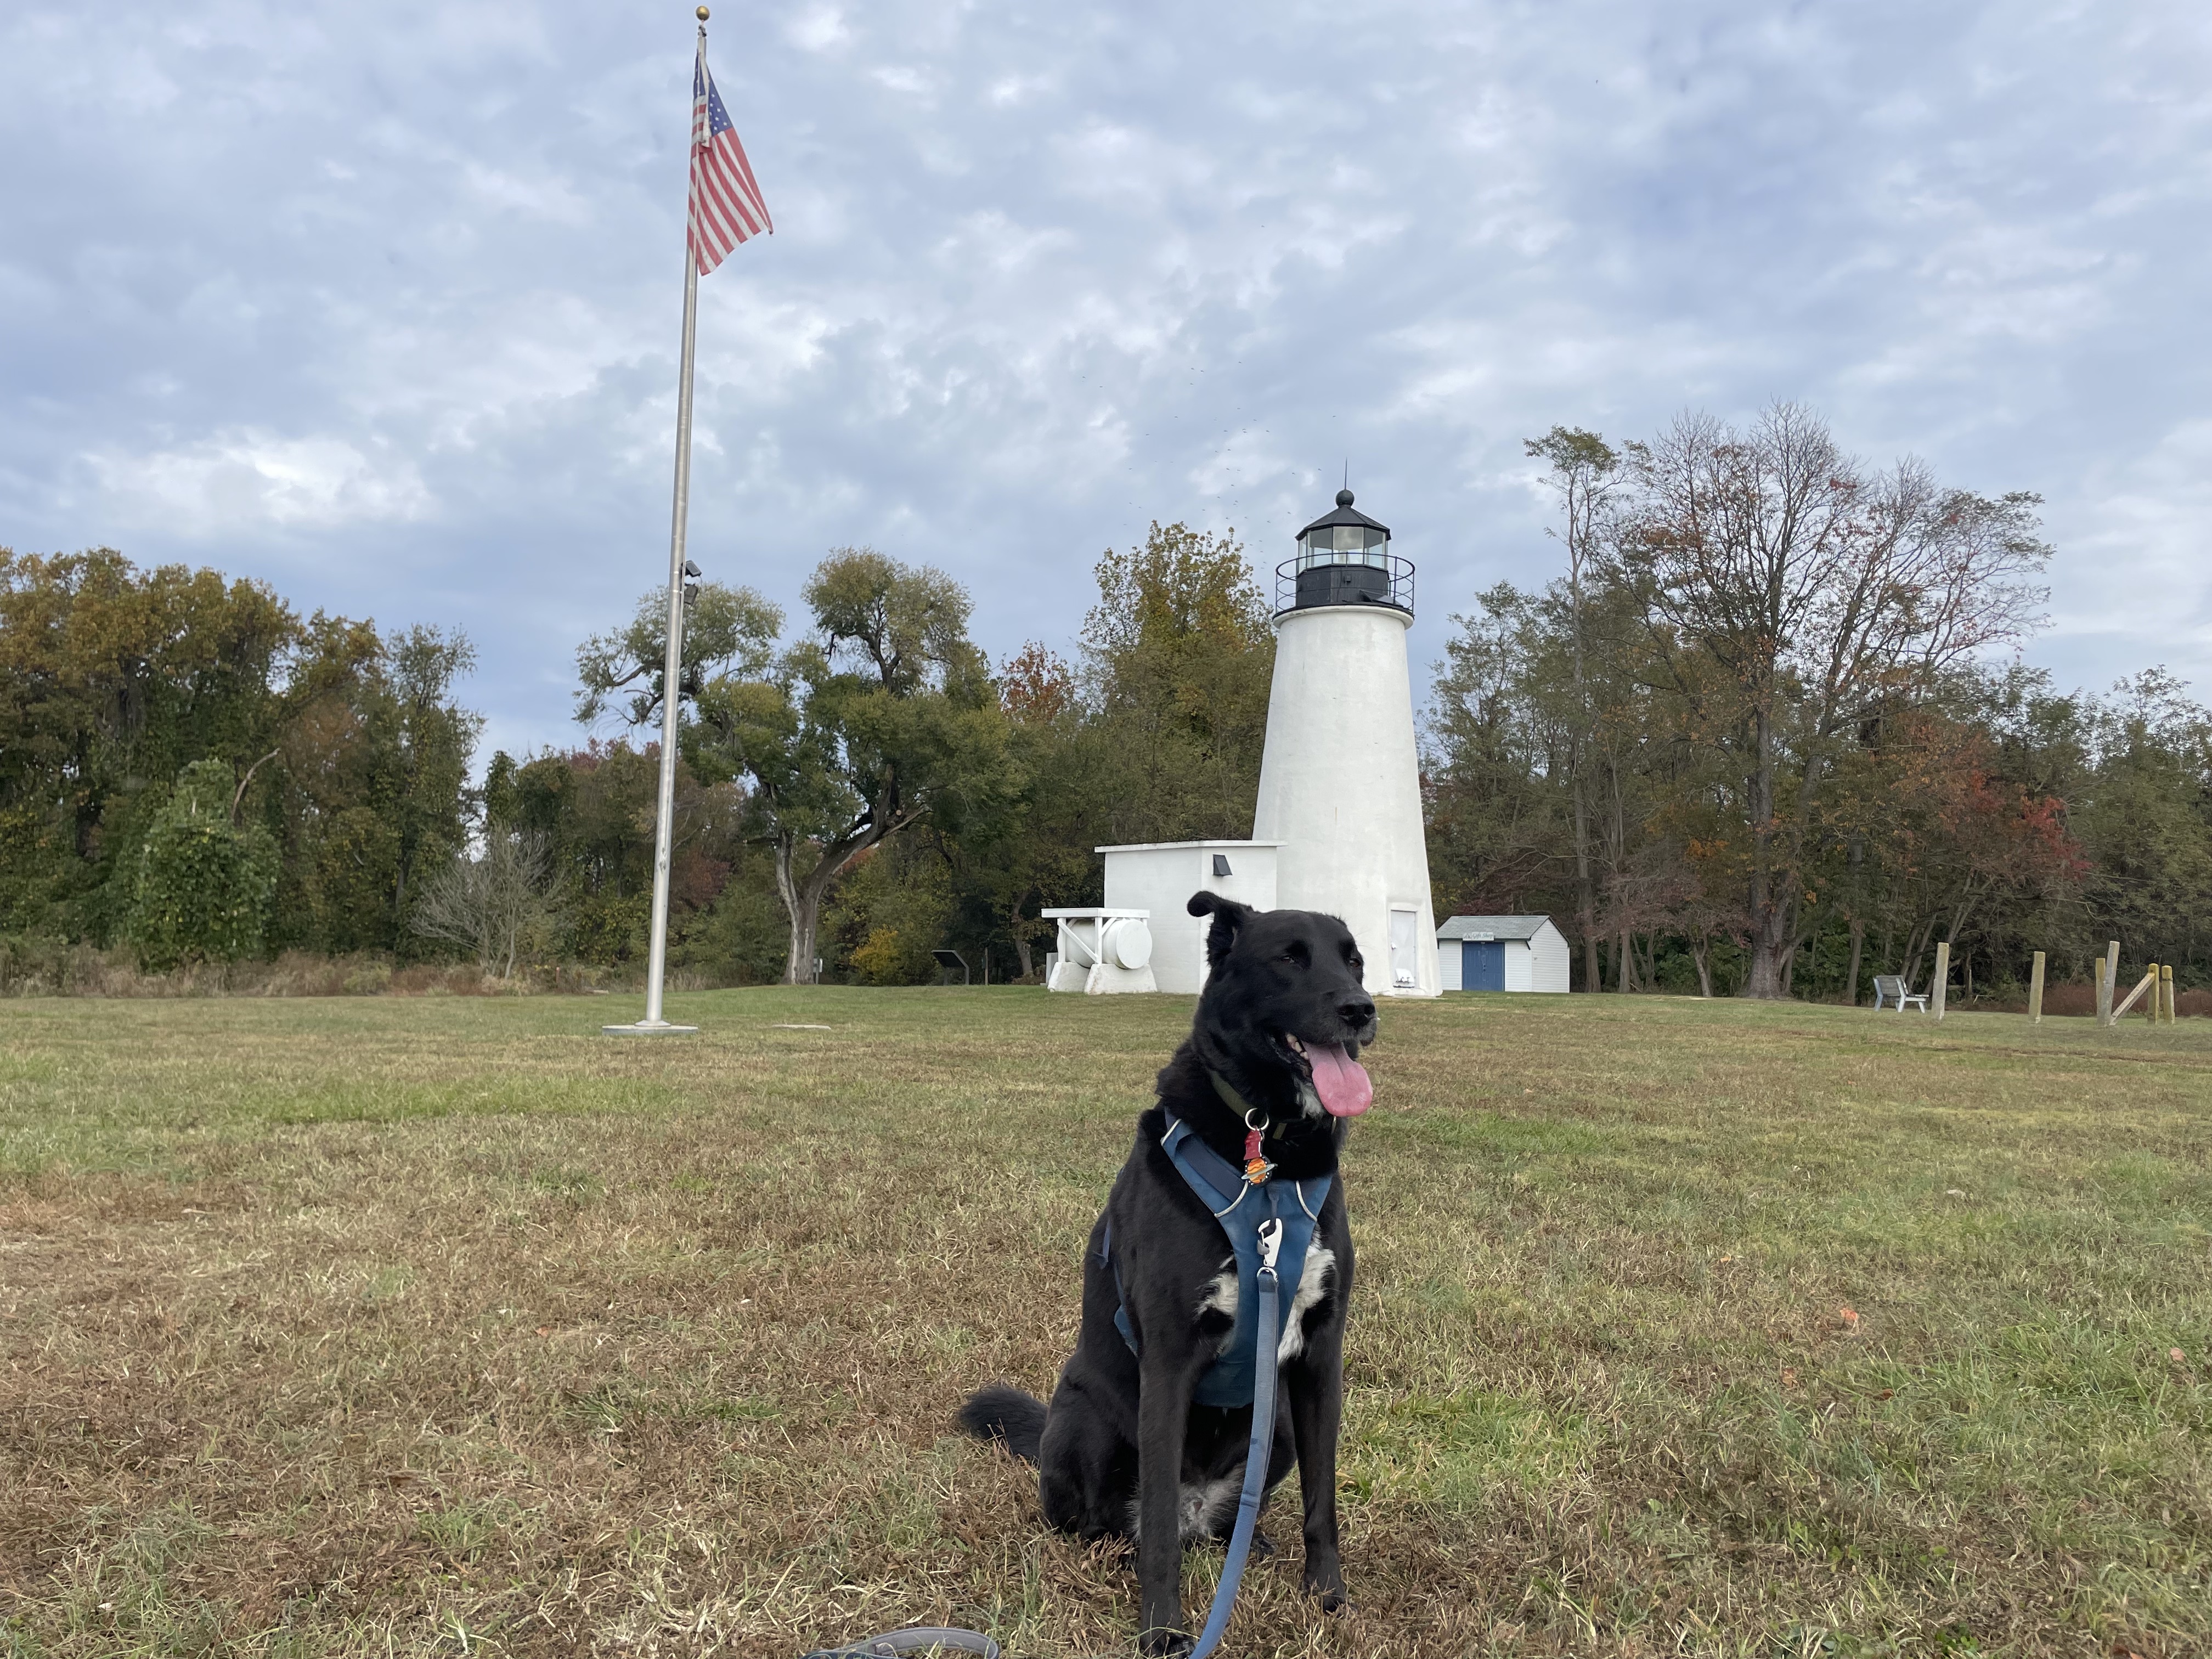 Blck dog standing in front of a light house and USA flag